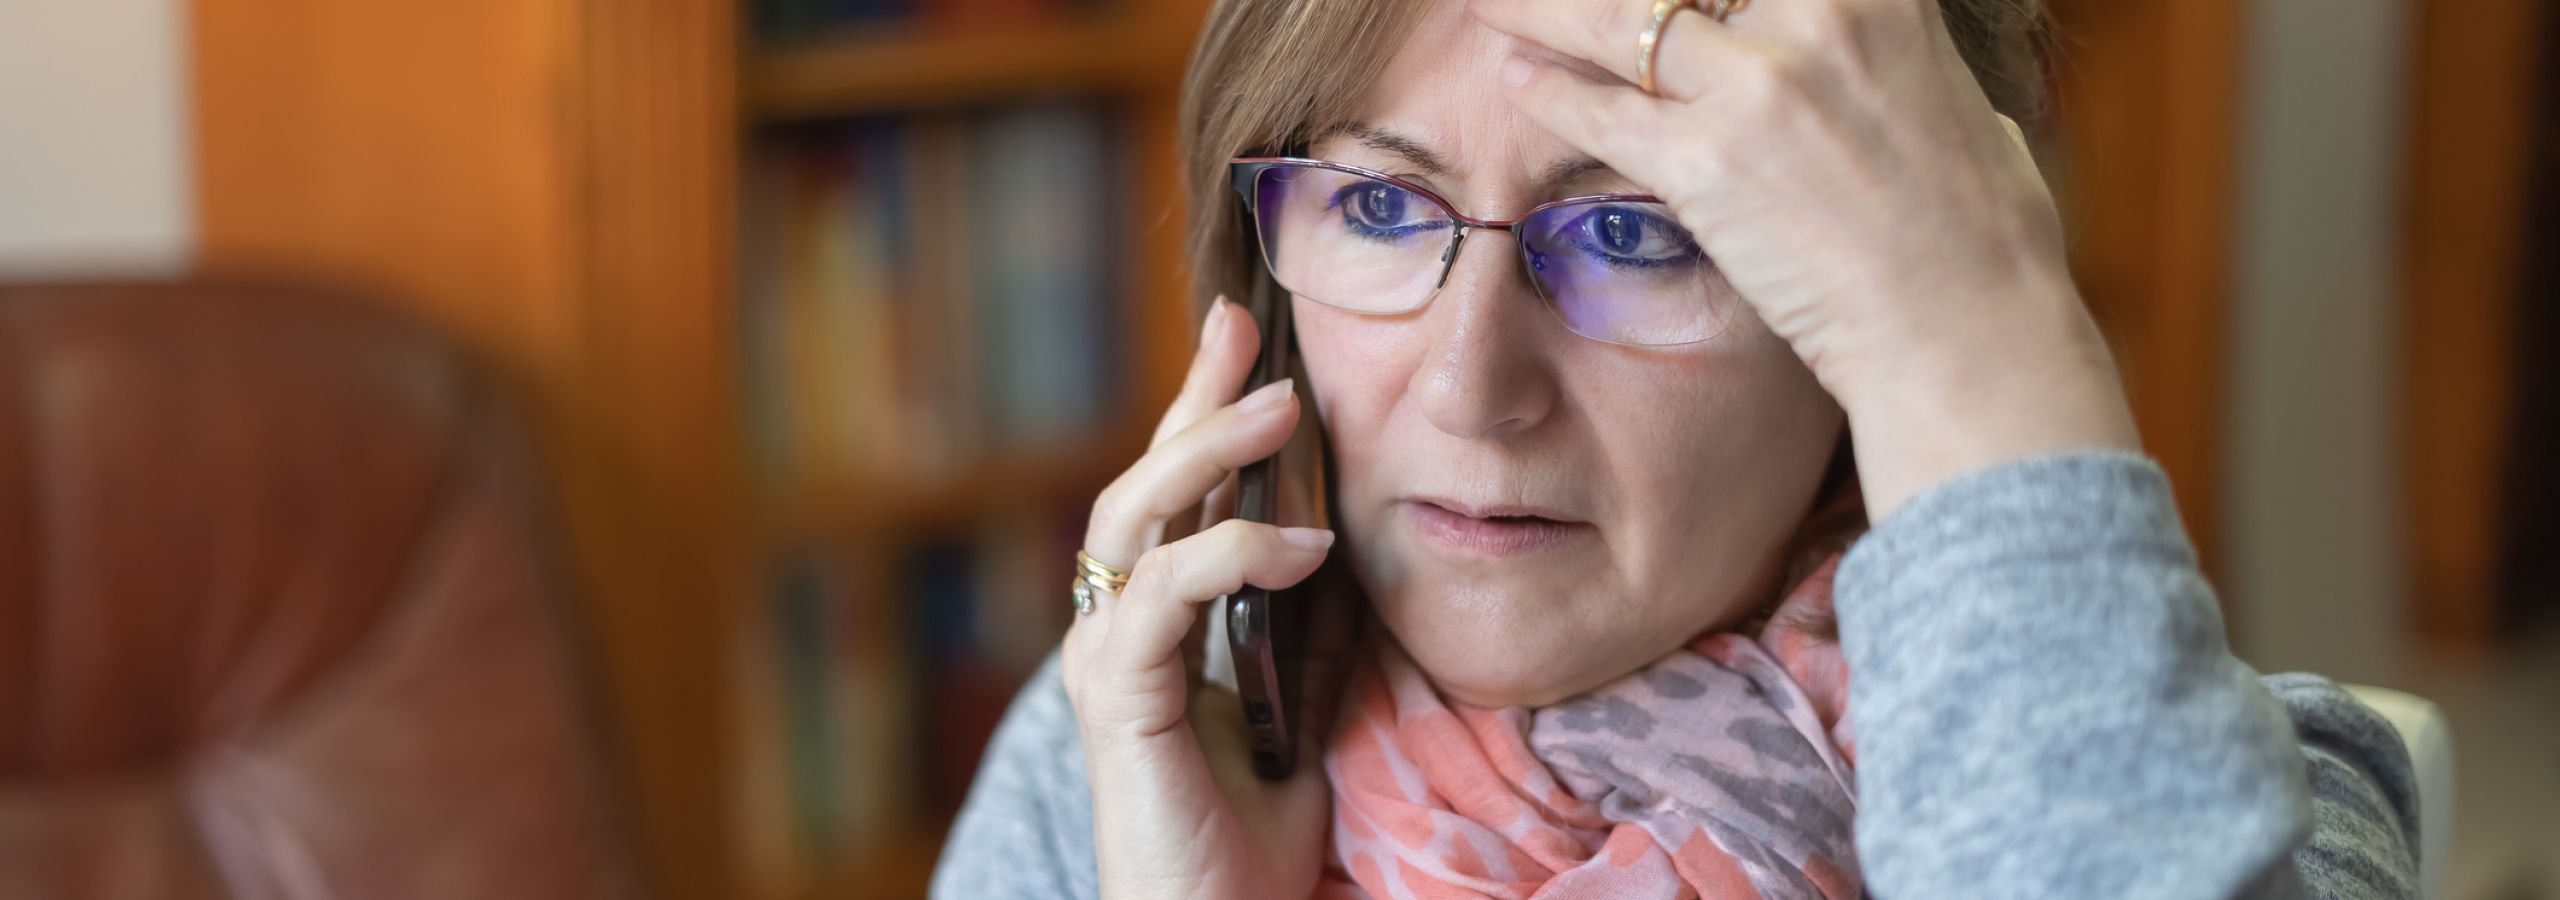 A middle-aged woman with glasses and a pink scarf answers a confusing scam call at home.